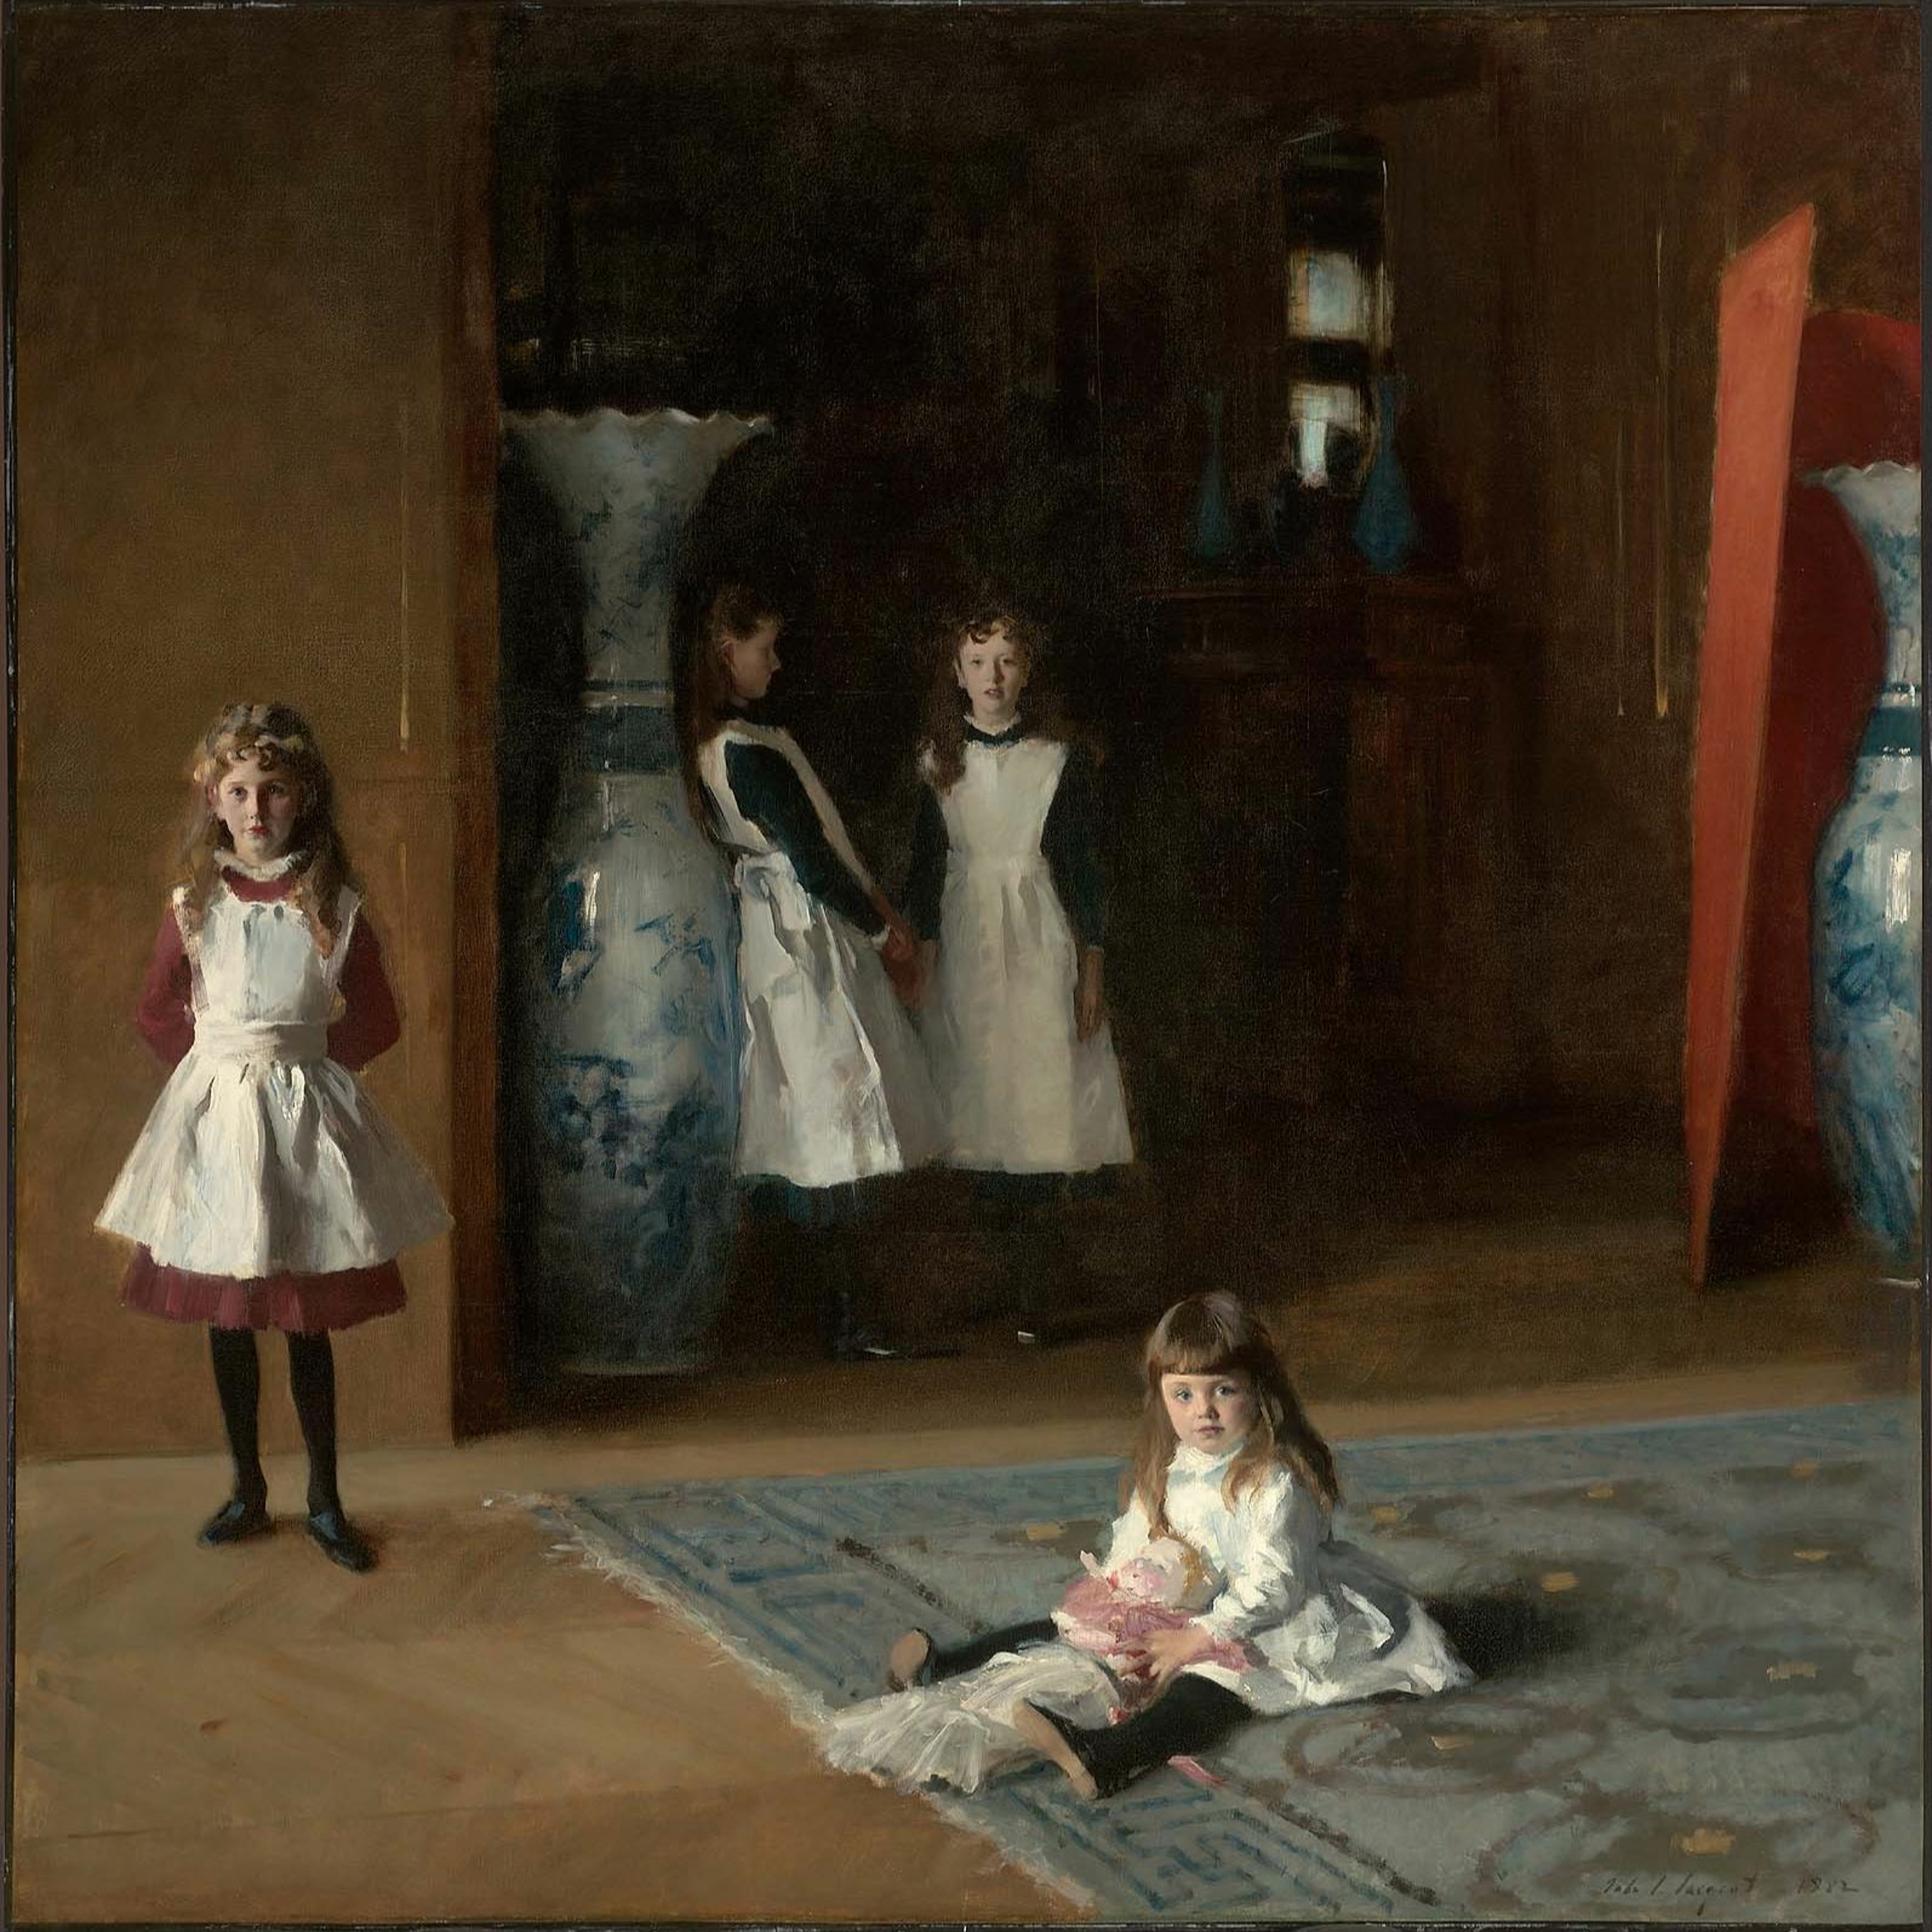 Ep. 11 - John Singer Sargent's "The Daughters of Edward Darley Boit" (1882)